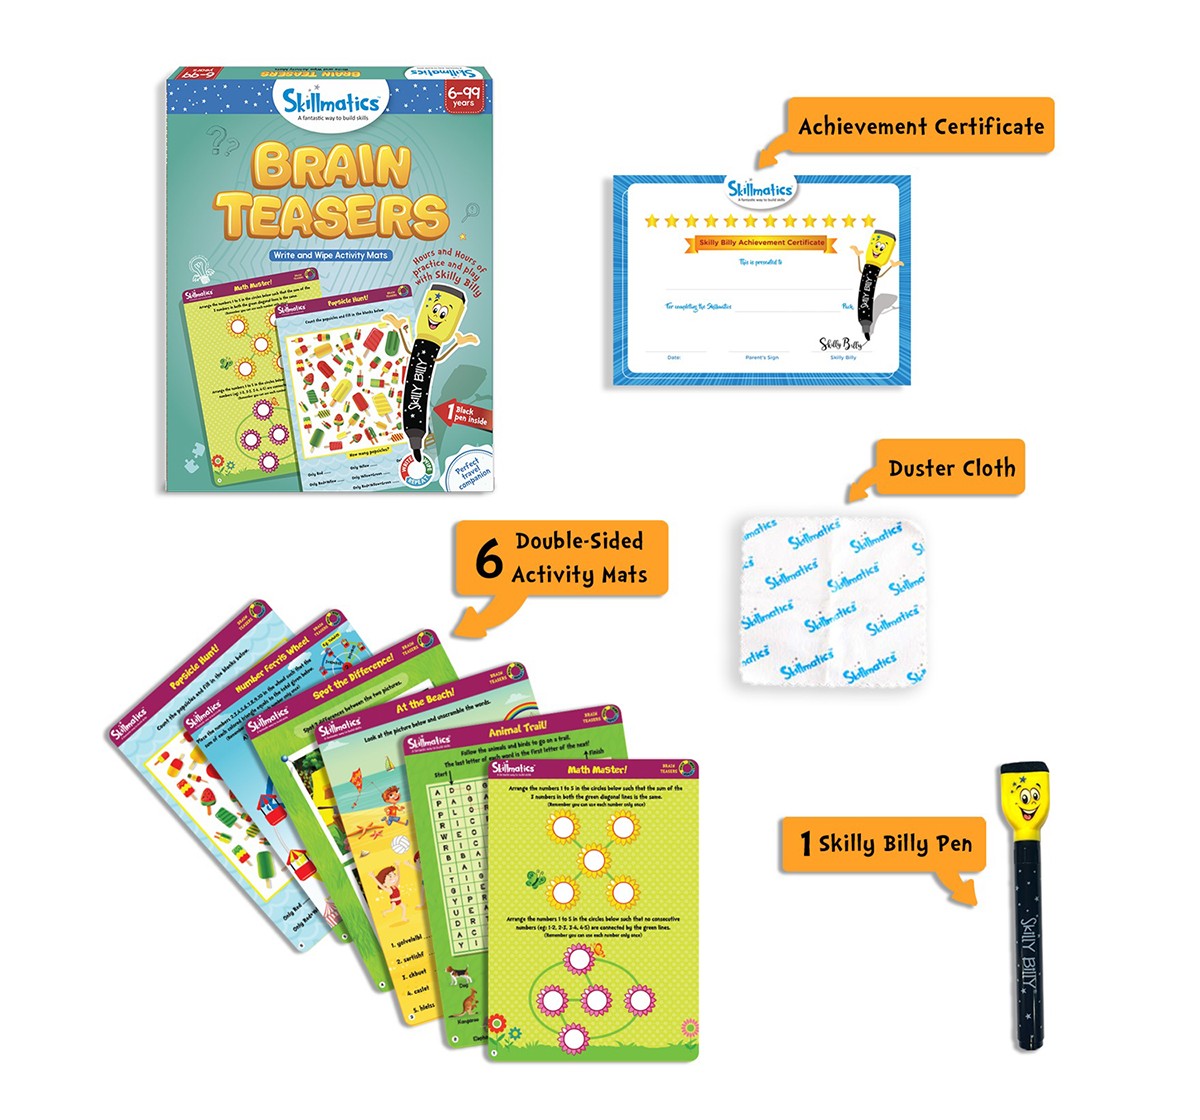  Skillmatics Brain Teasers Games for Kids age 6Y+ 